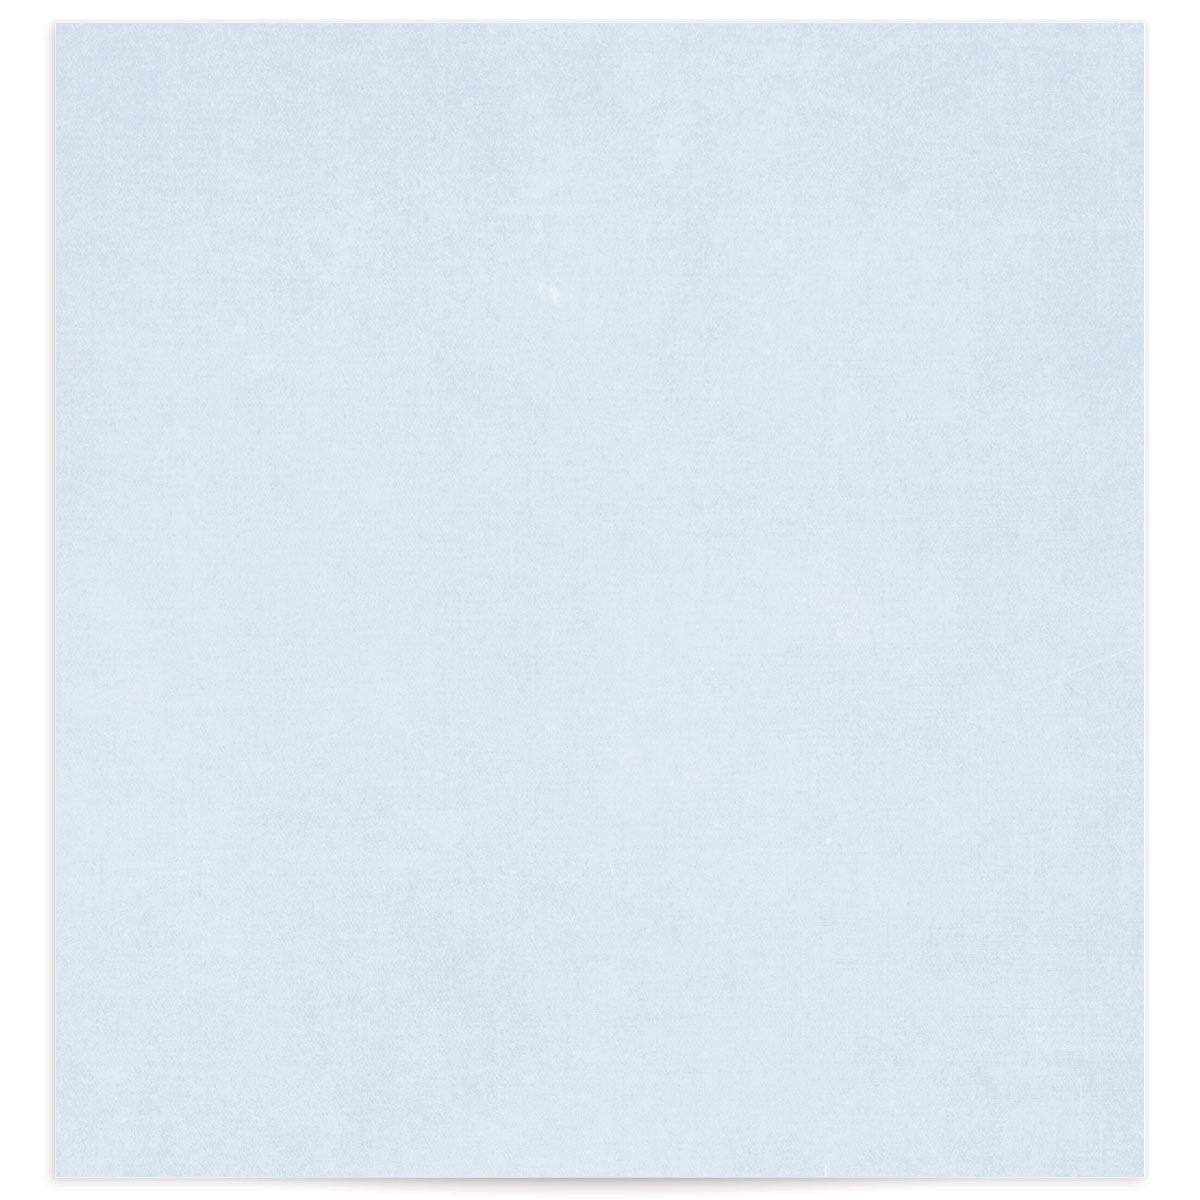 Rustic Emblem Envelope Liners front in French Blue